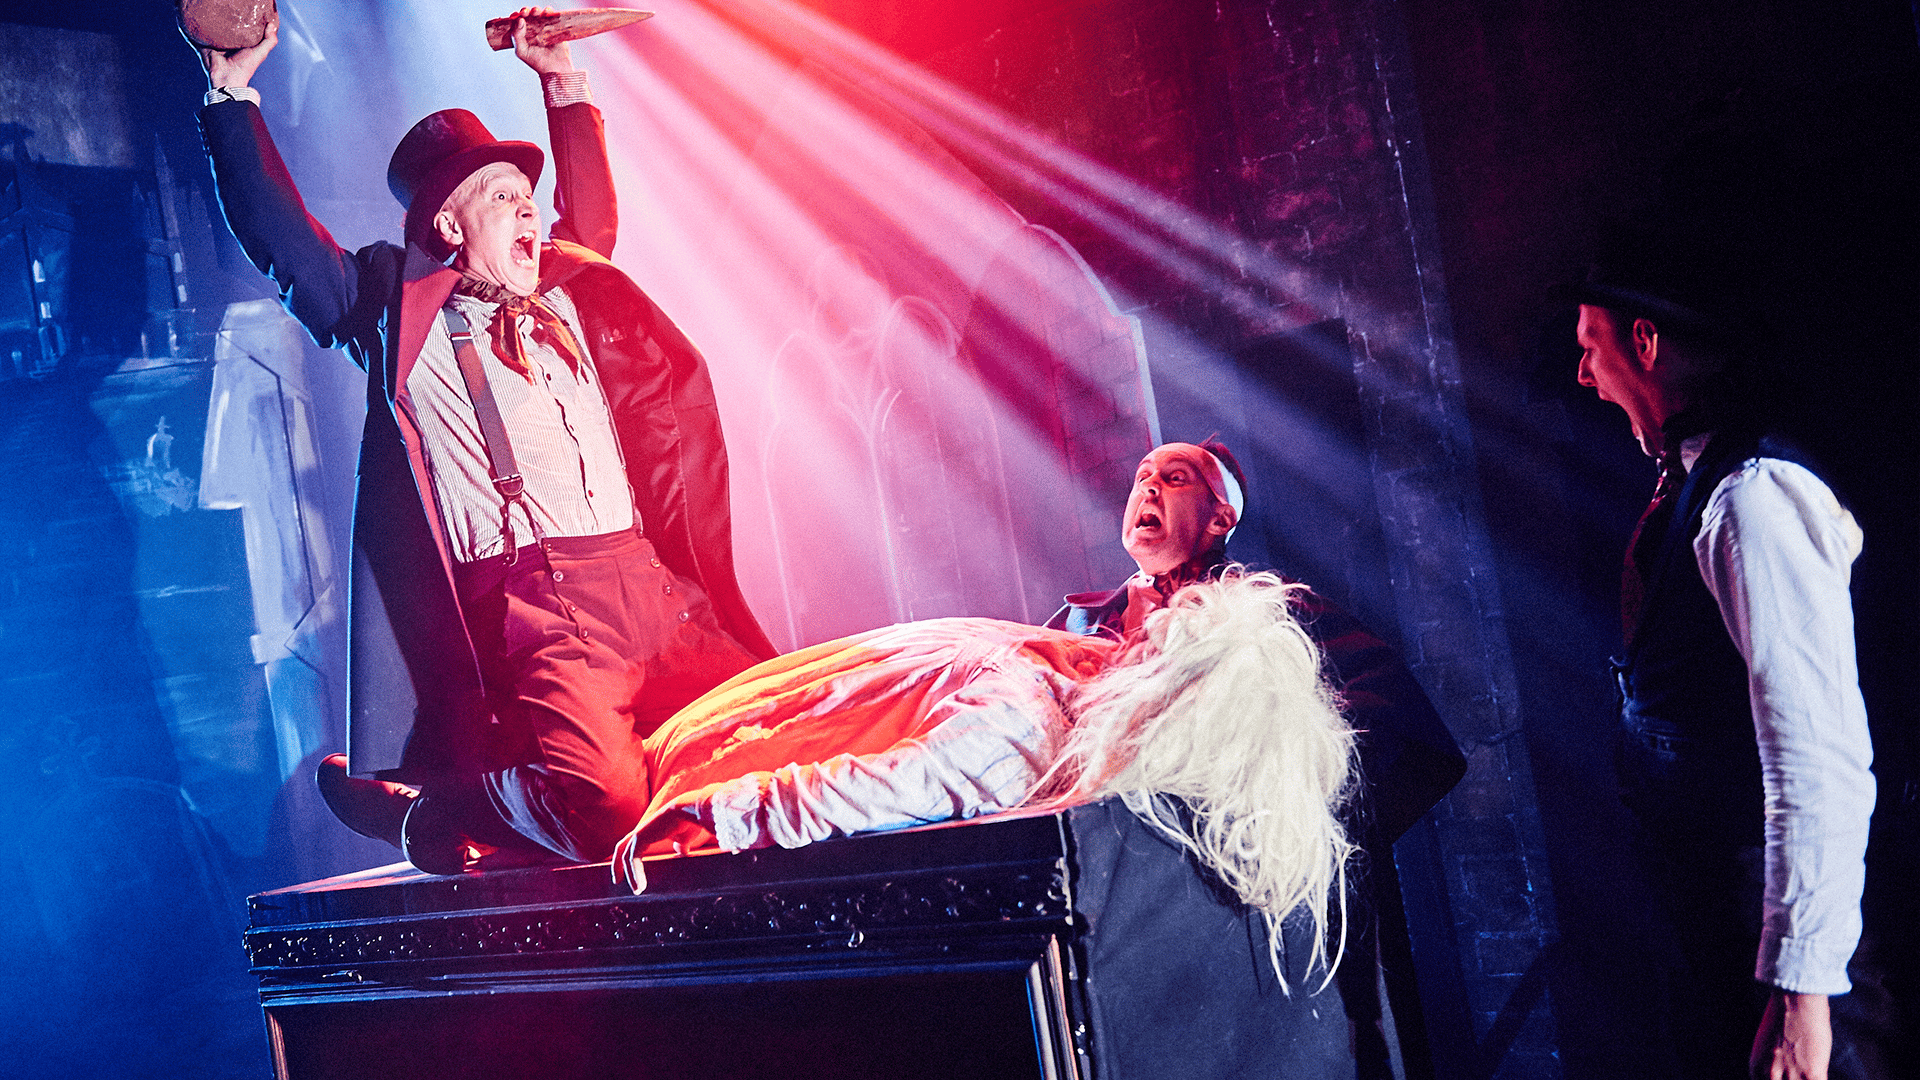 Inside a church. On the left-hand side, a performer dressed in victorian clothing and wearing a top hat holds two wooden stakes in the air whilse kneeling on another perfromer dressed in white with a blond wig. Both of them are on a coffin. In the centre of the image, a performer looks up, mouth gaping-open. To the right-hand side of the image, a perfomer looks to the left hand side, mouth gaping-open.